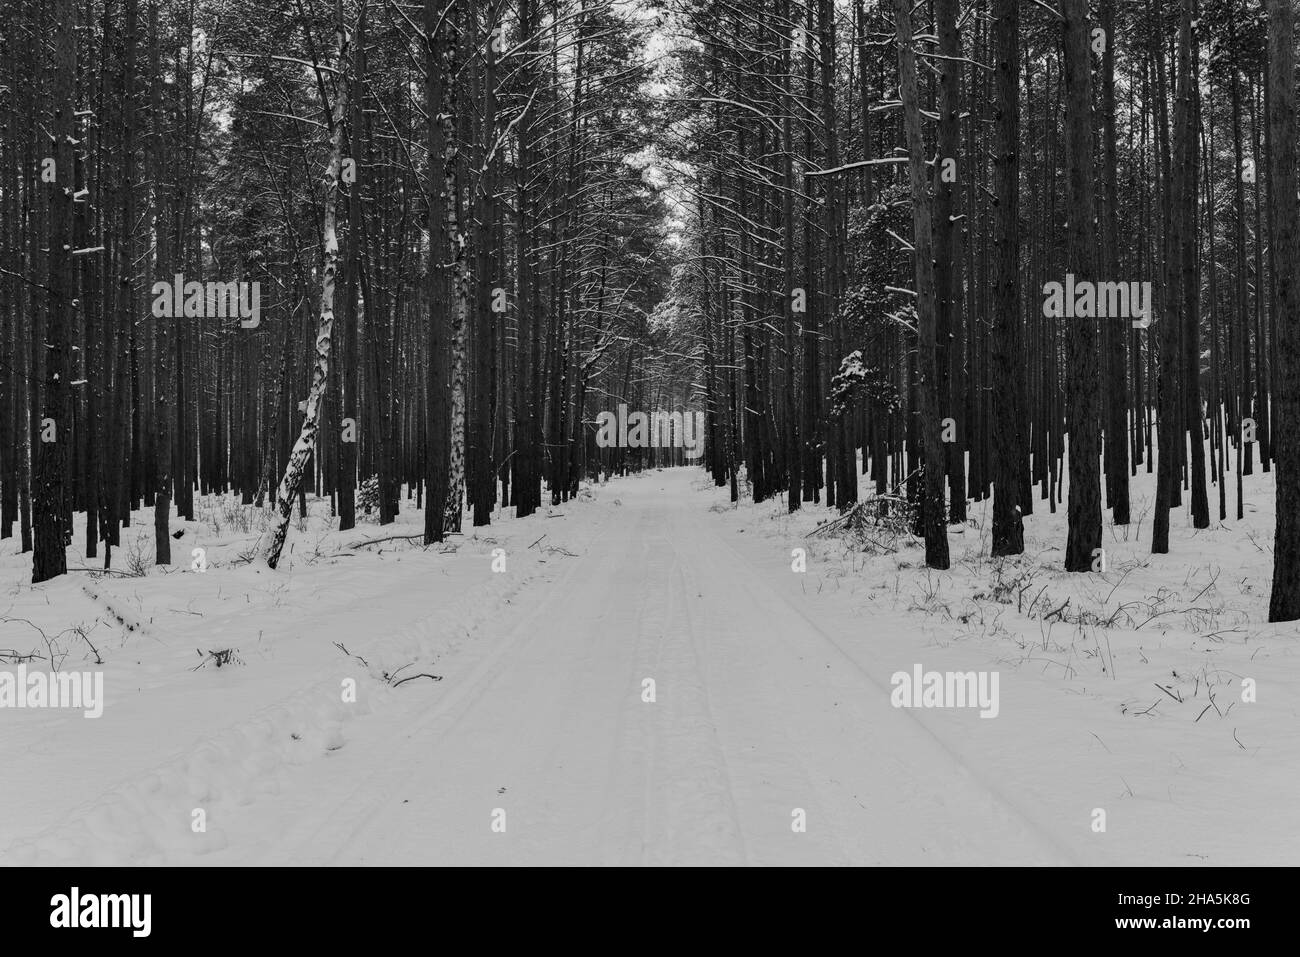 Forest Black and White Stock Photos & Images - Alamy